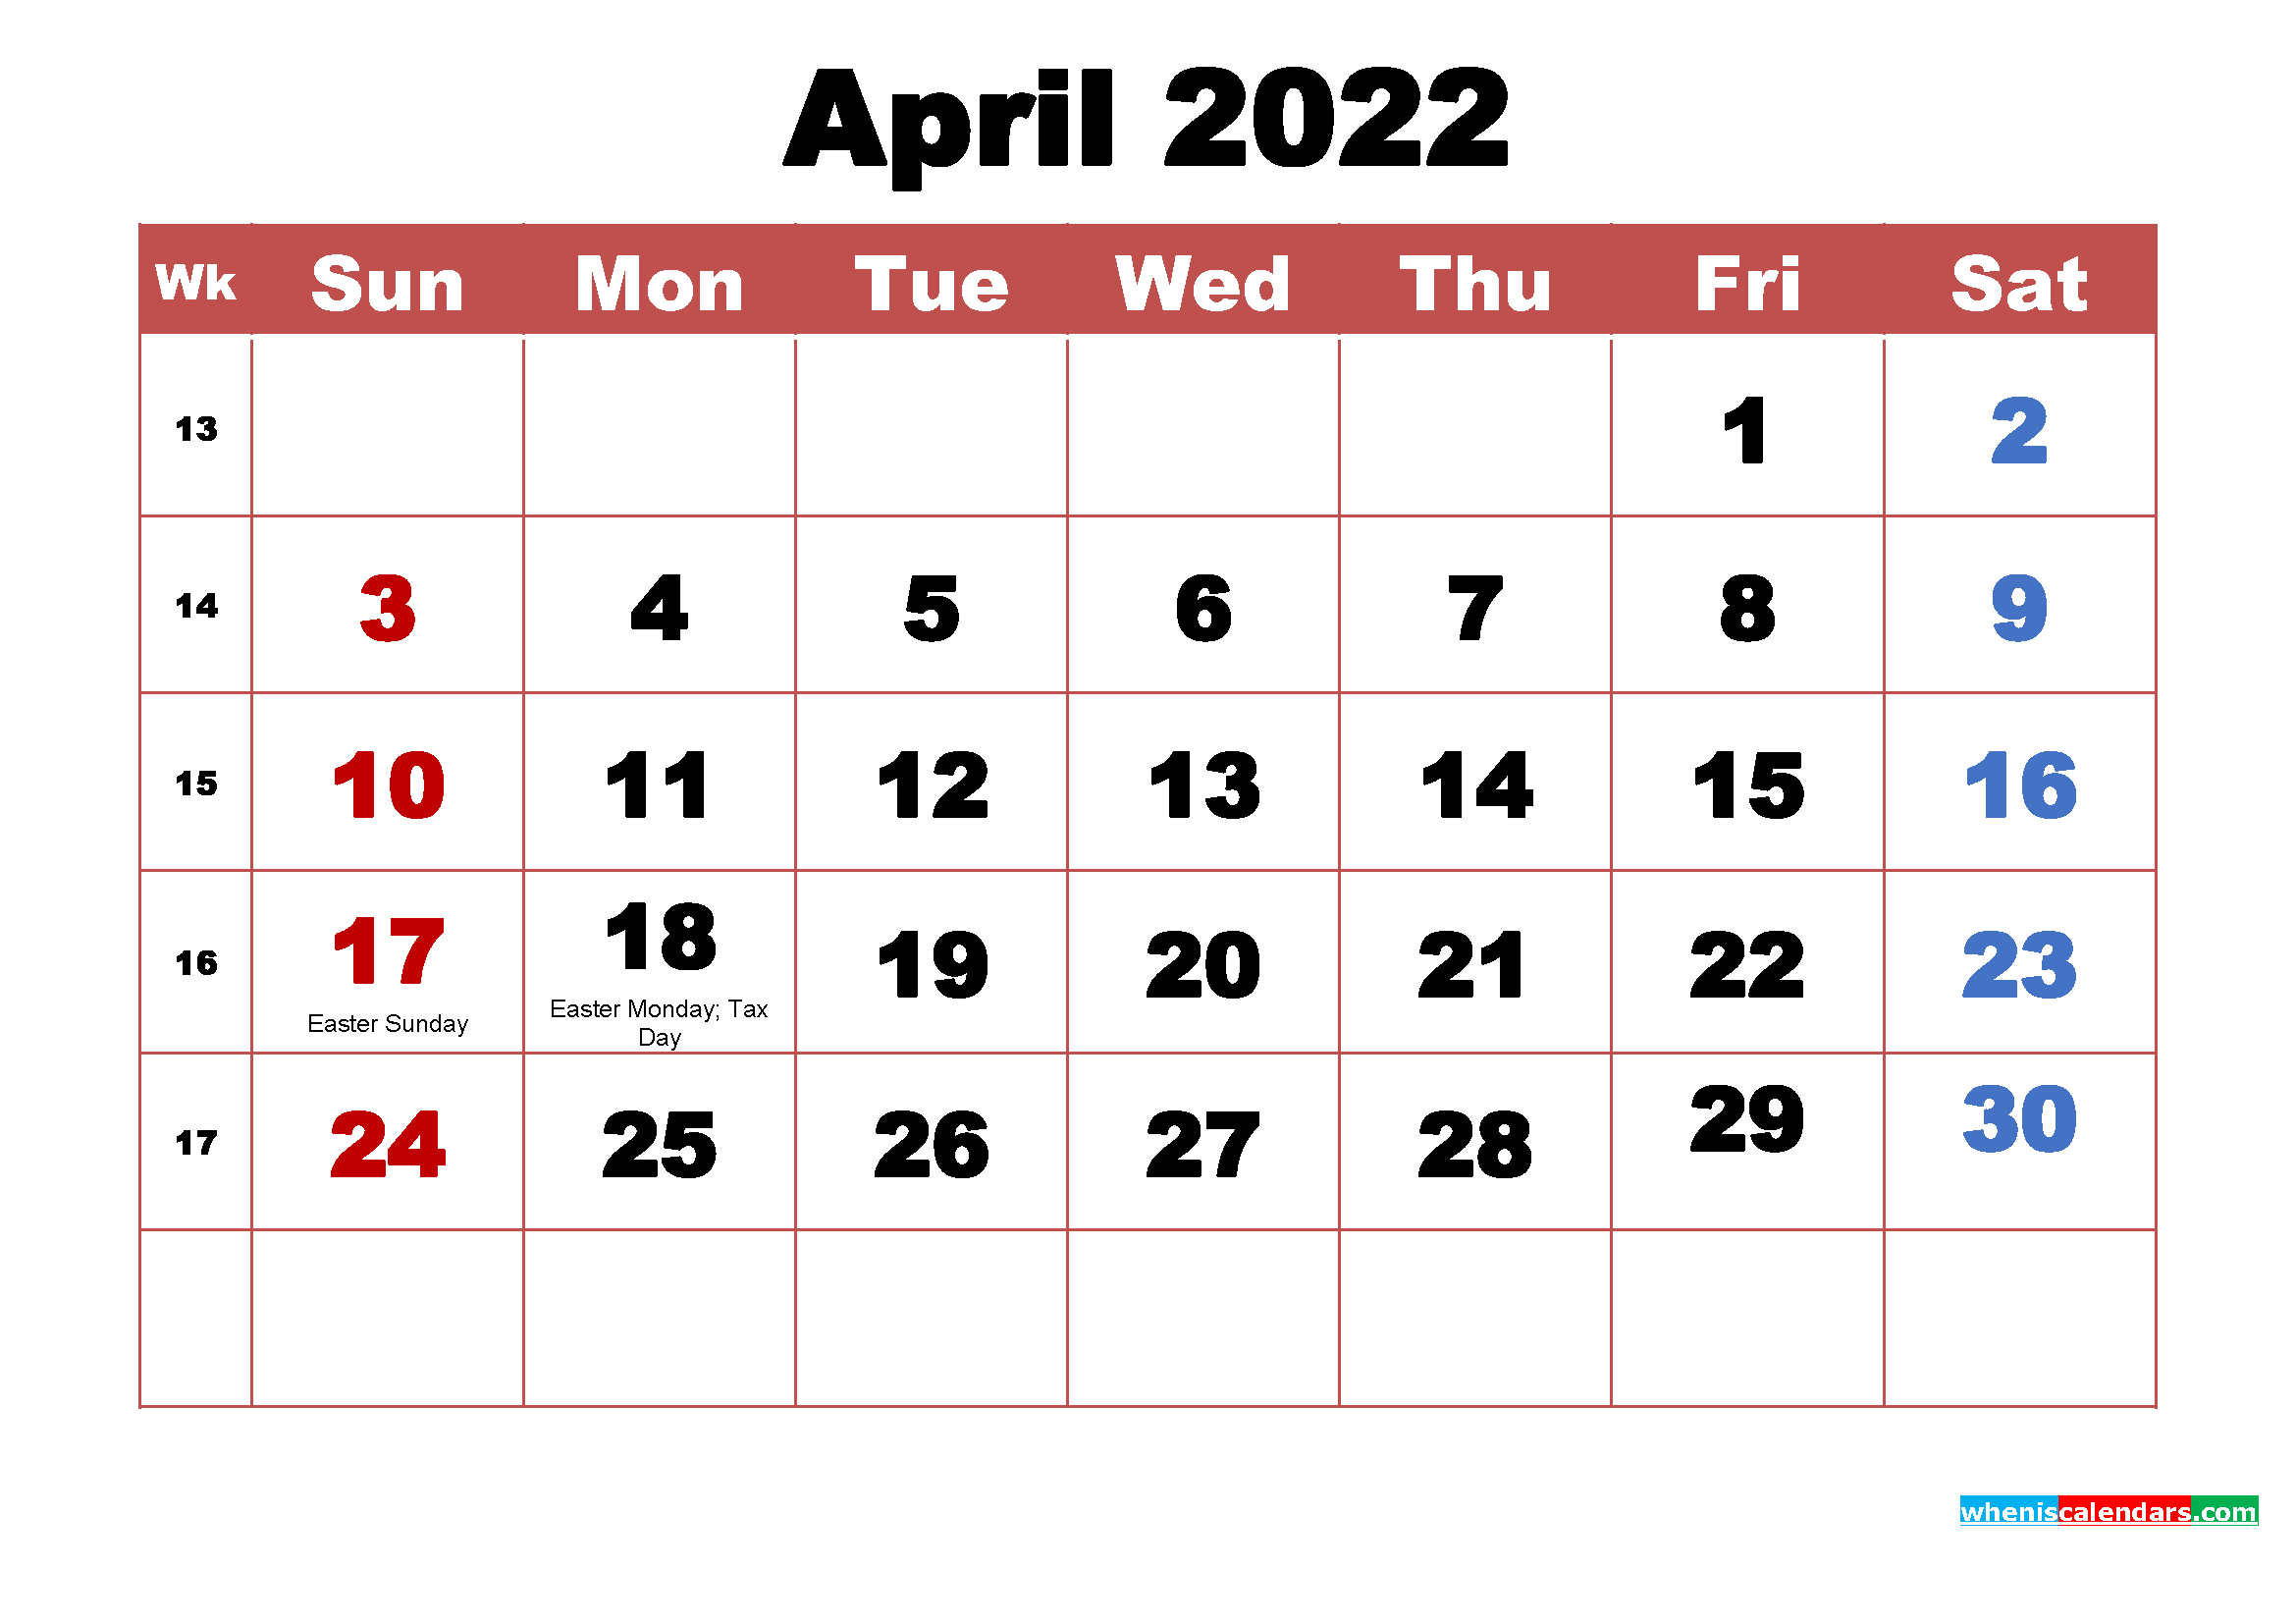 April May Holidays 2022 - Latest News Update